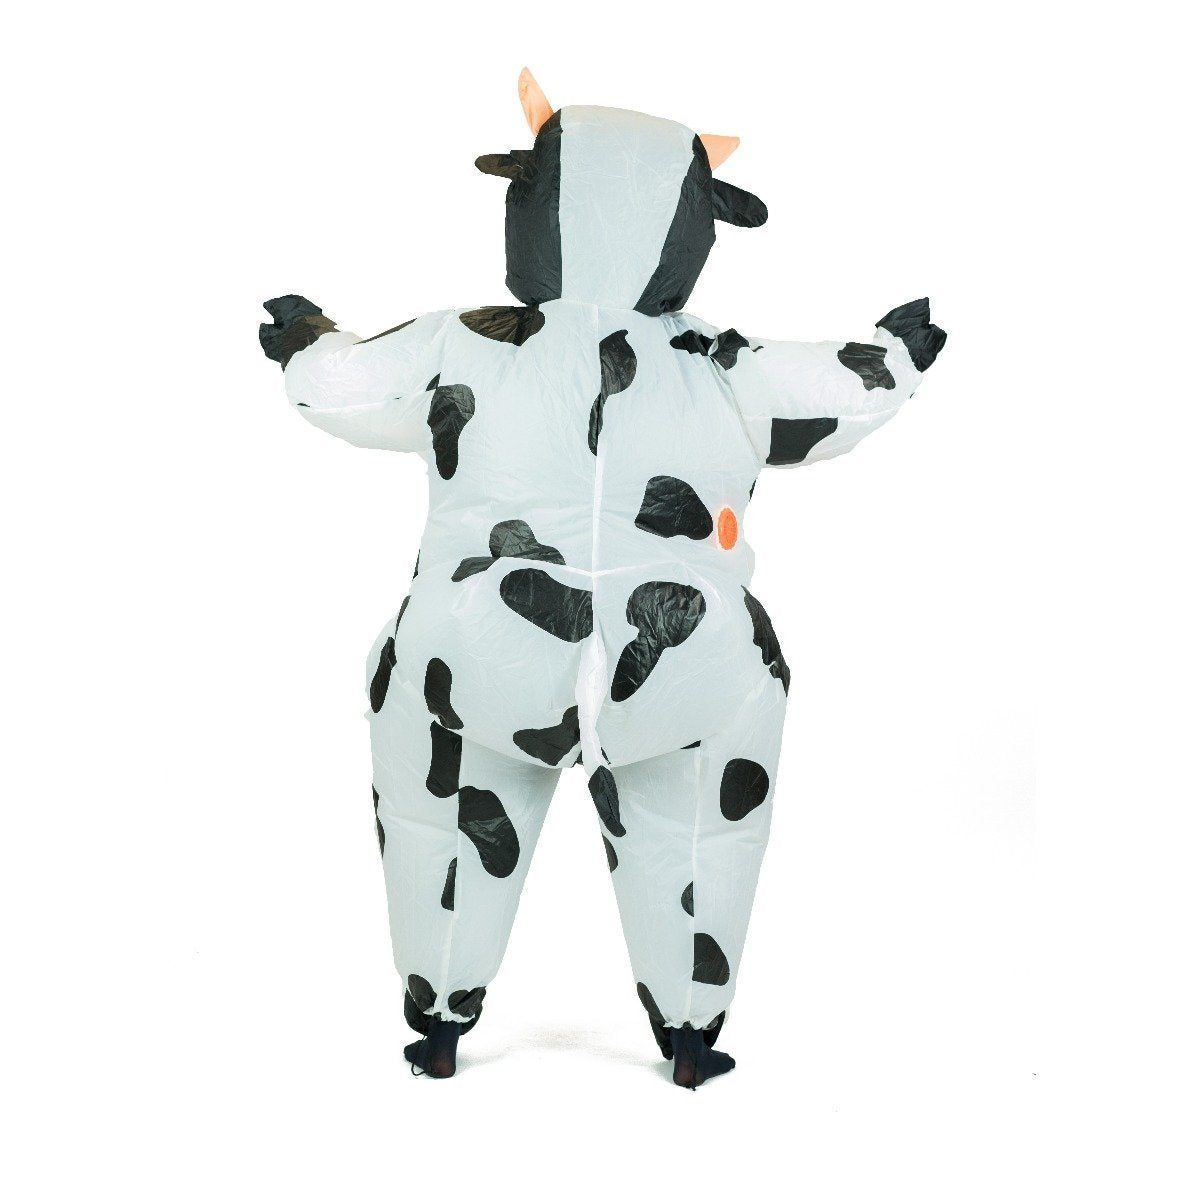 Fancy Dress - Inflatable Cow Costume